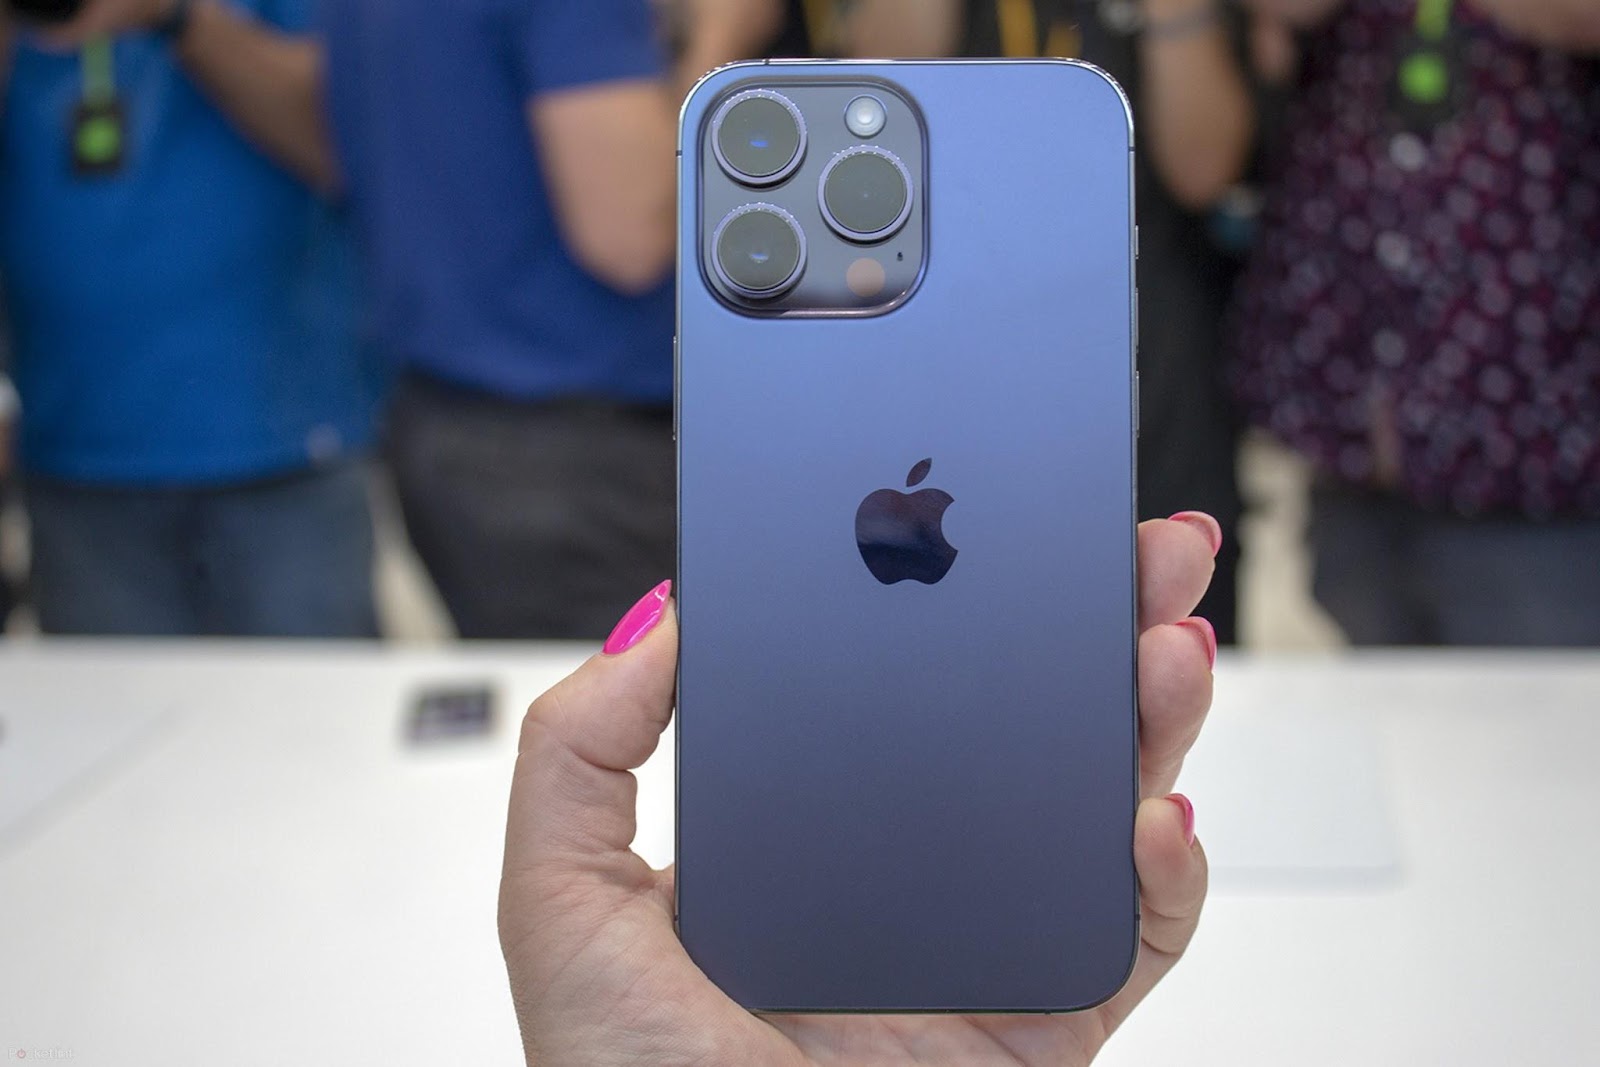 This image shows the iPhone 14 Pro Max in the hands of a woman.